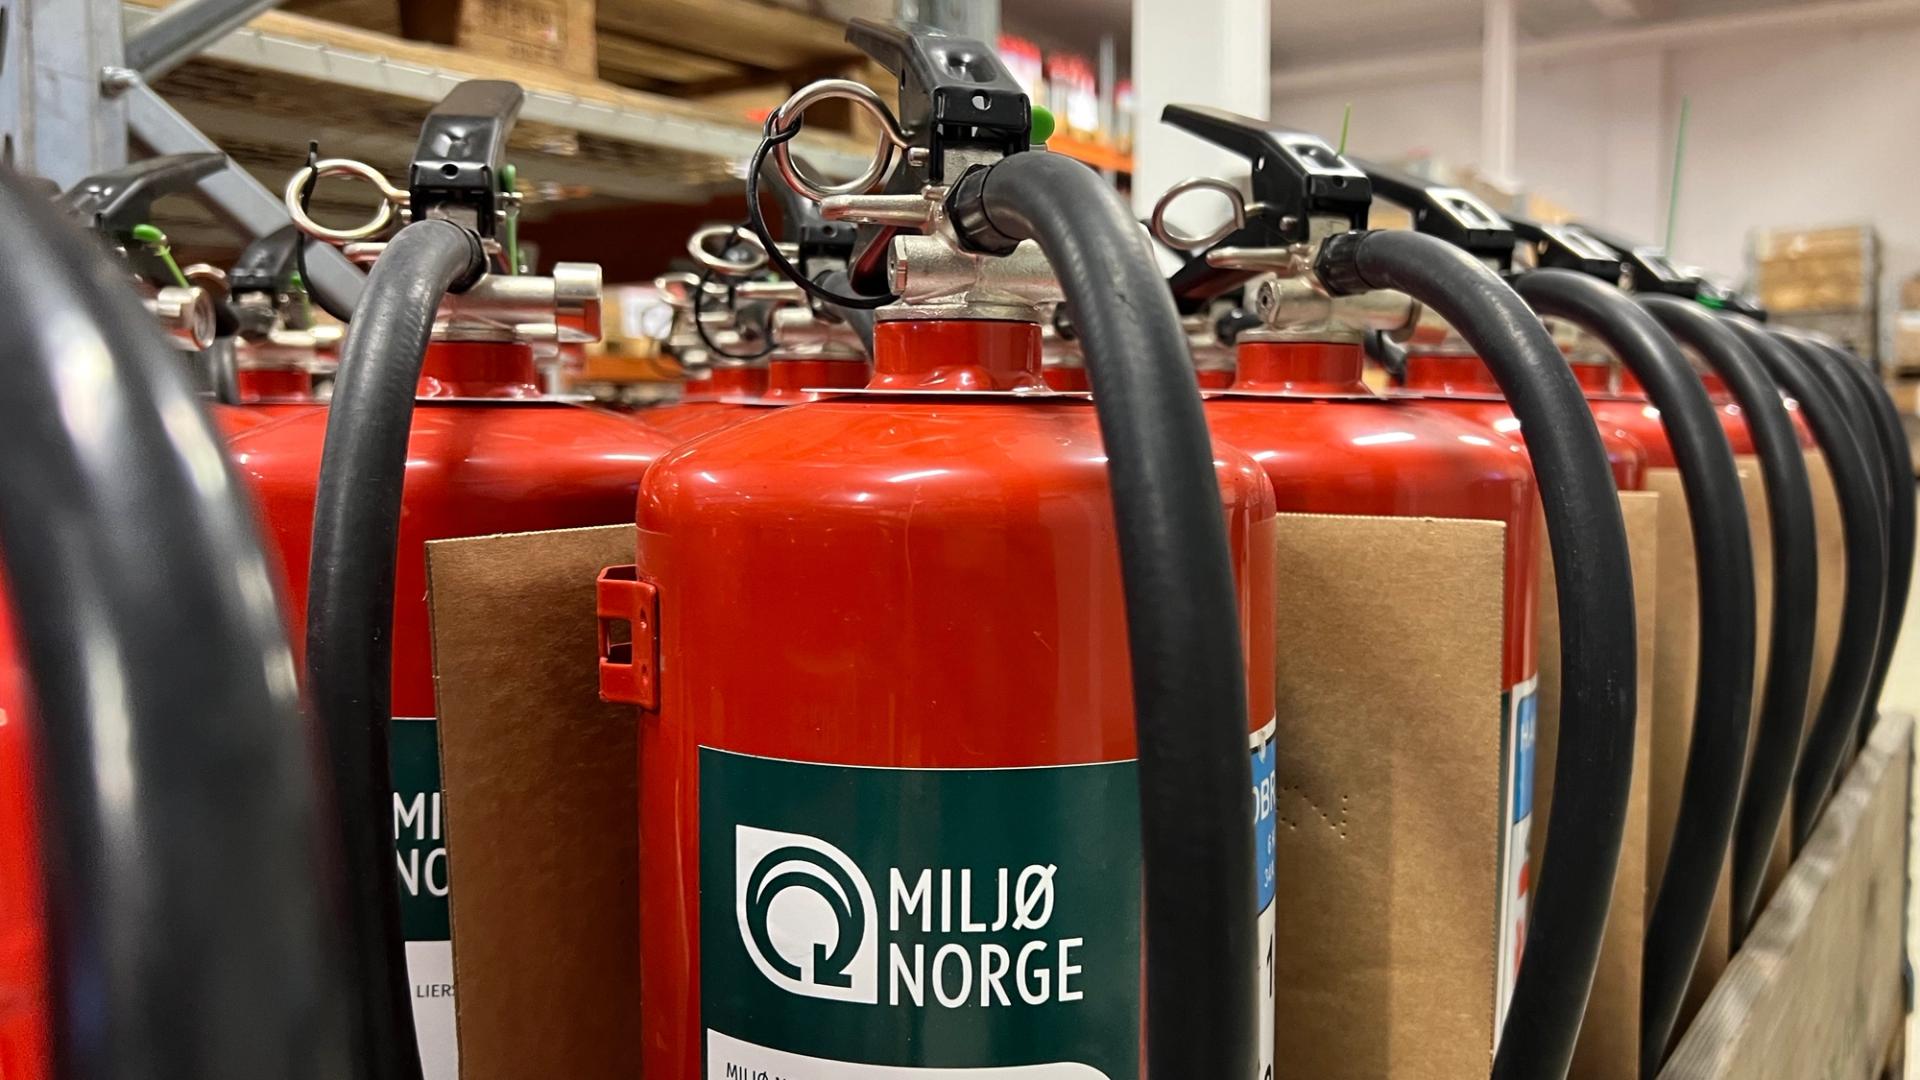 Refurbished fire extinguishers lined up in two rows